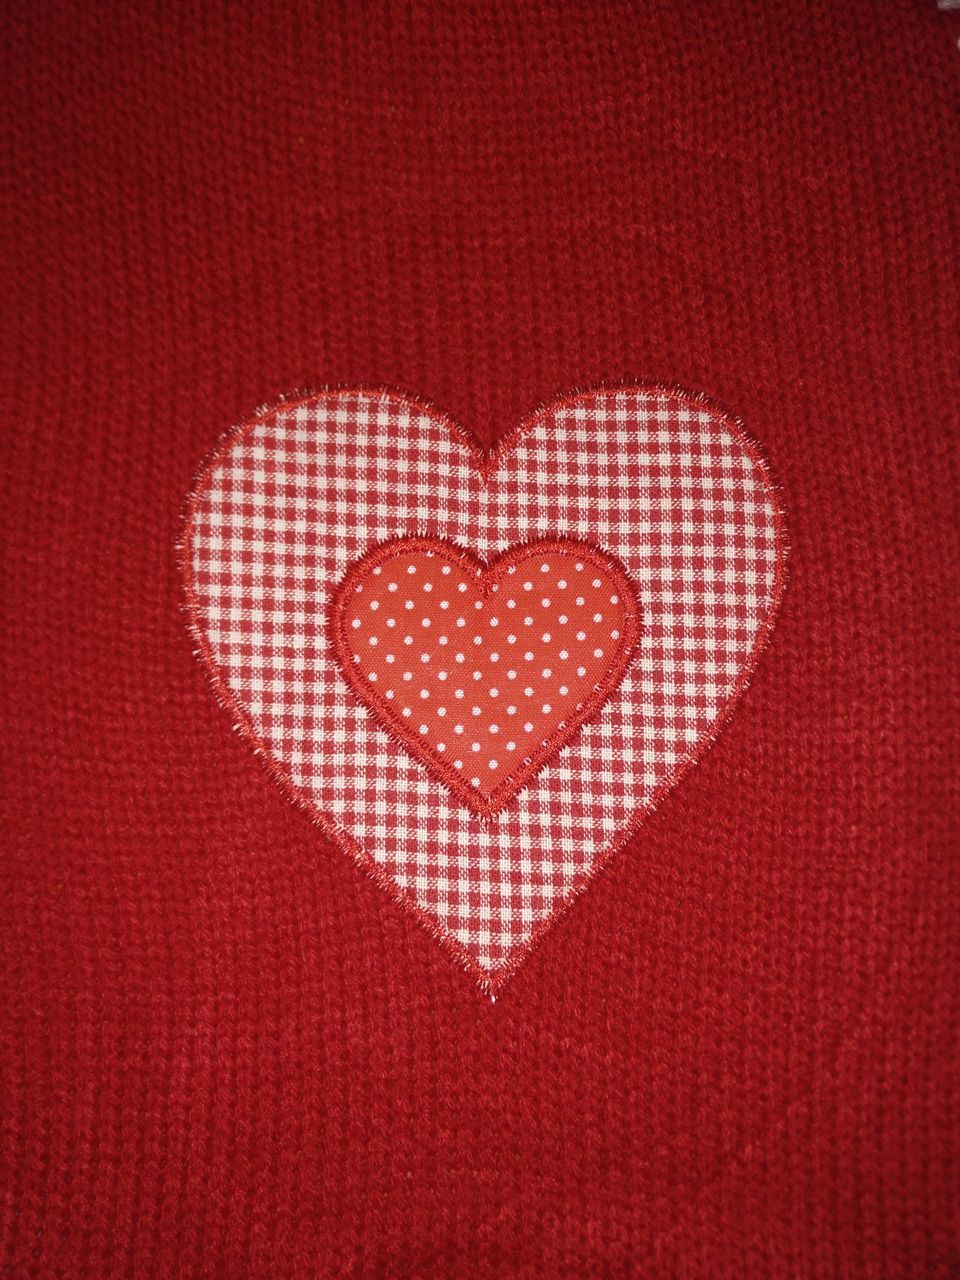 CLOSE-UP OF HEART SHAPE DECORATION ON RED WALL